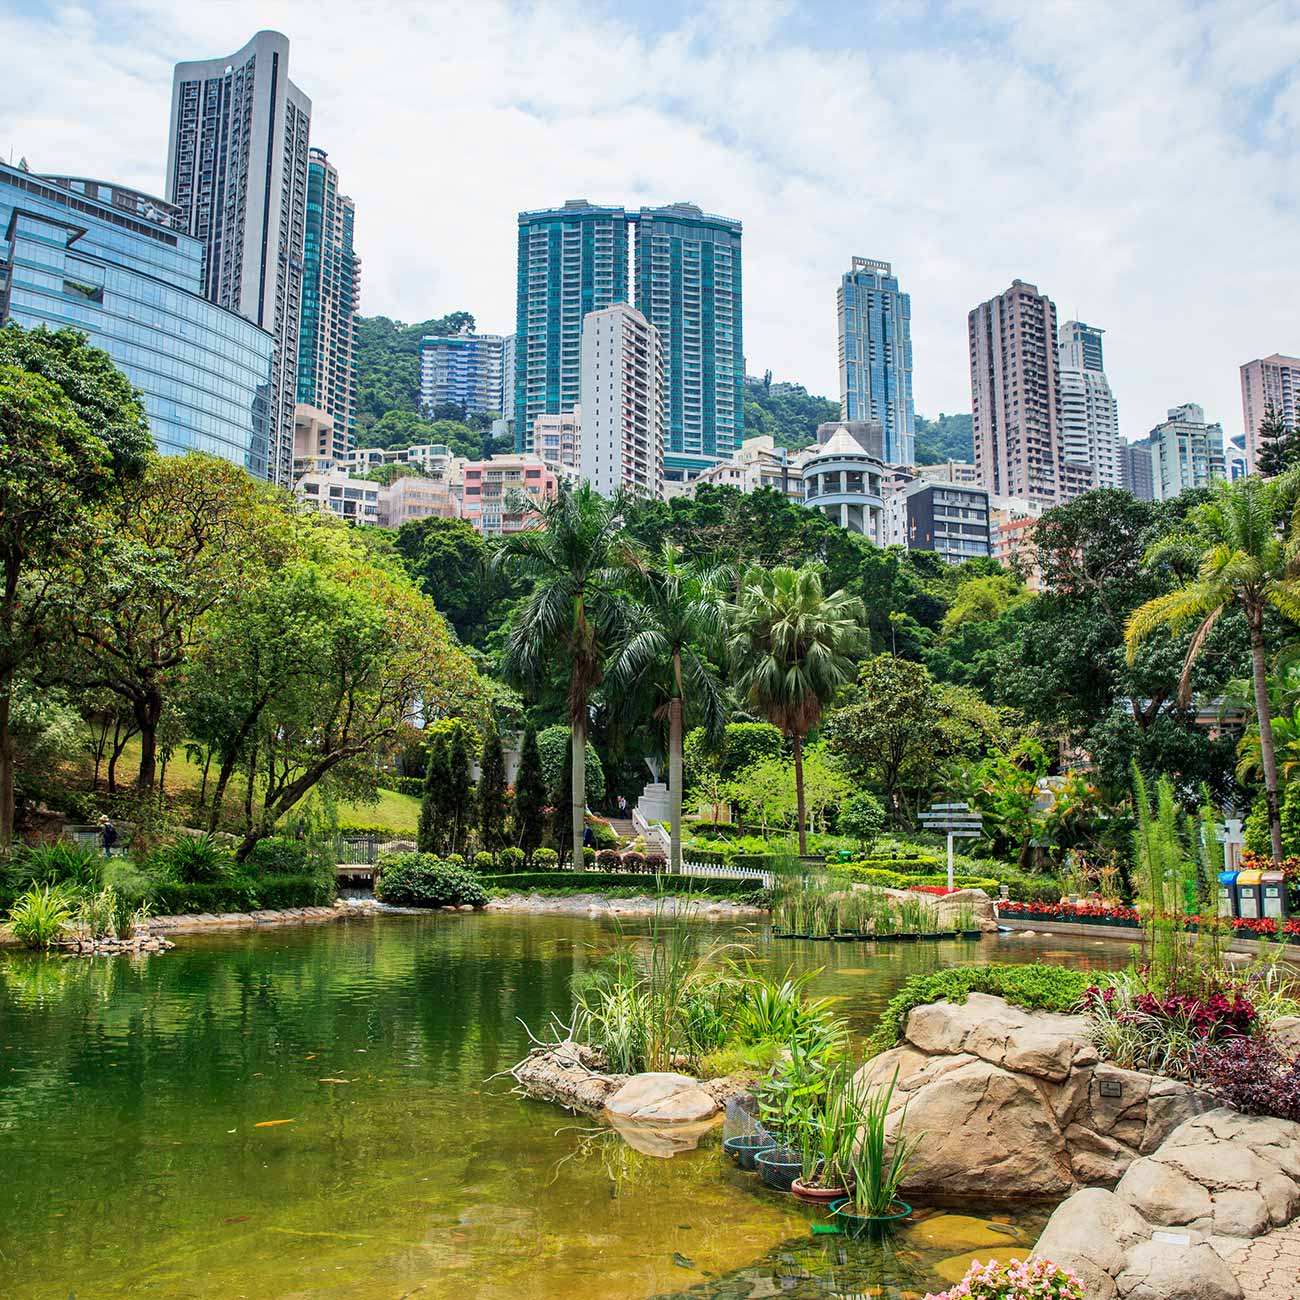 Parks and gardens in Hong Kong